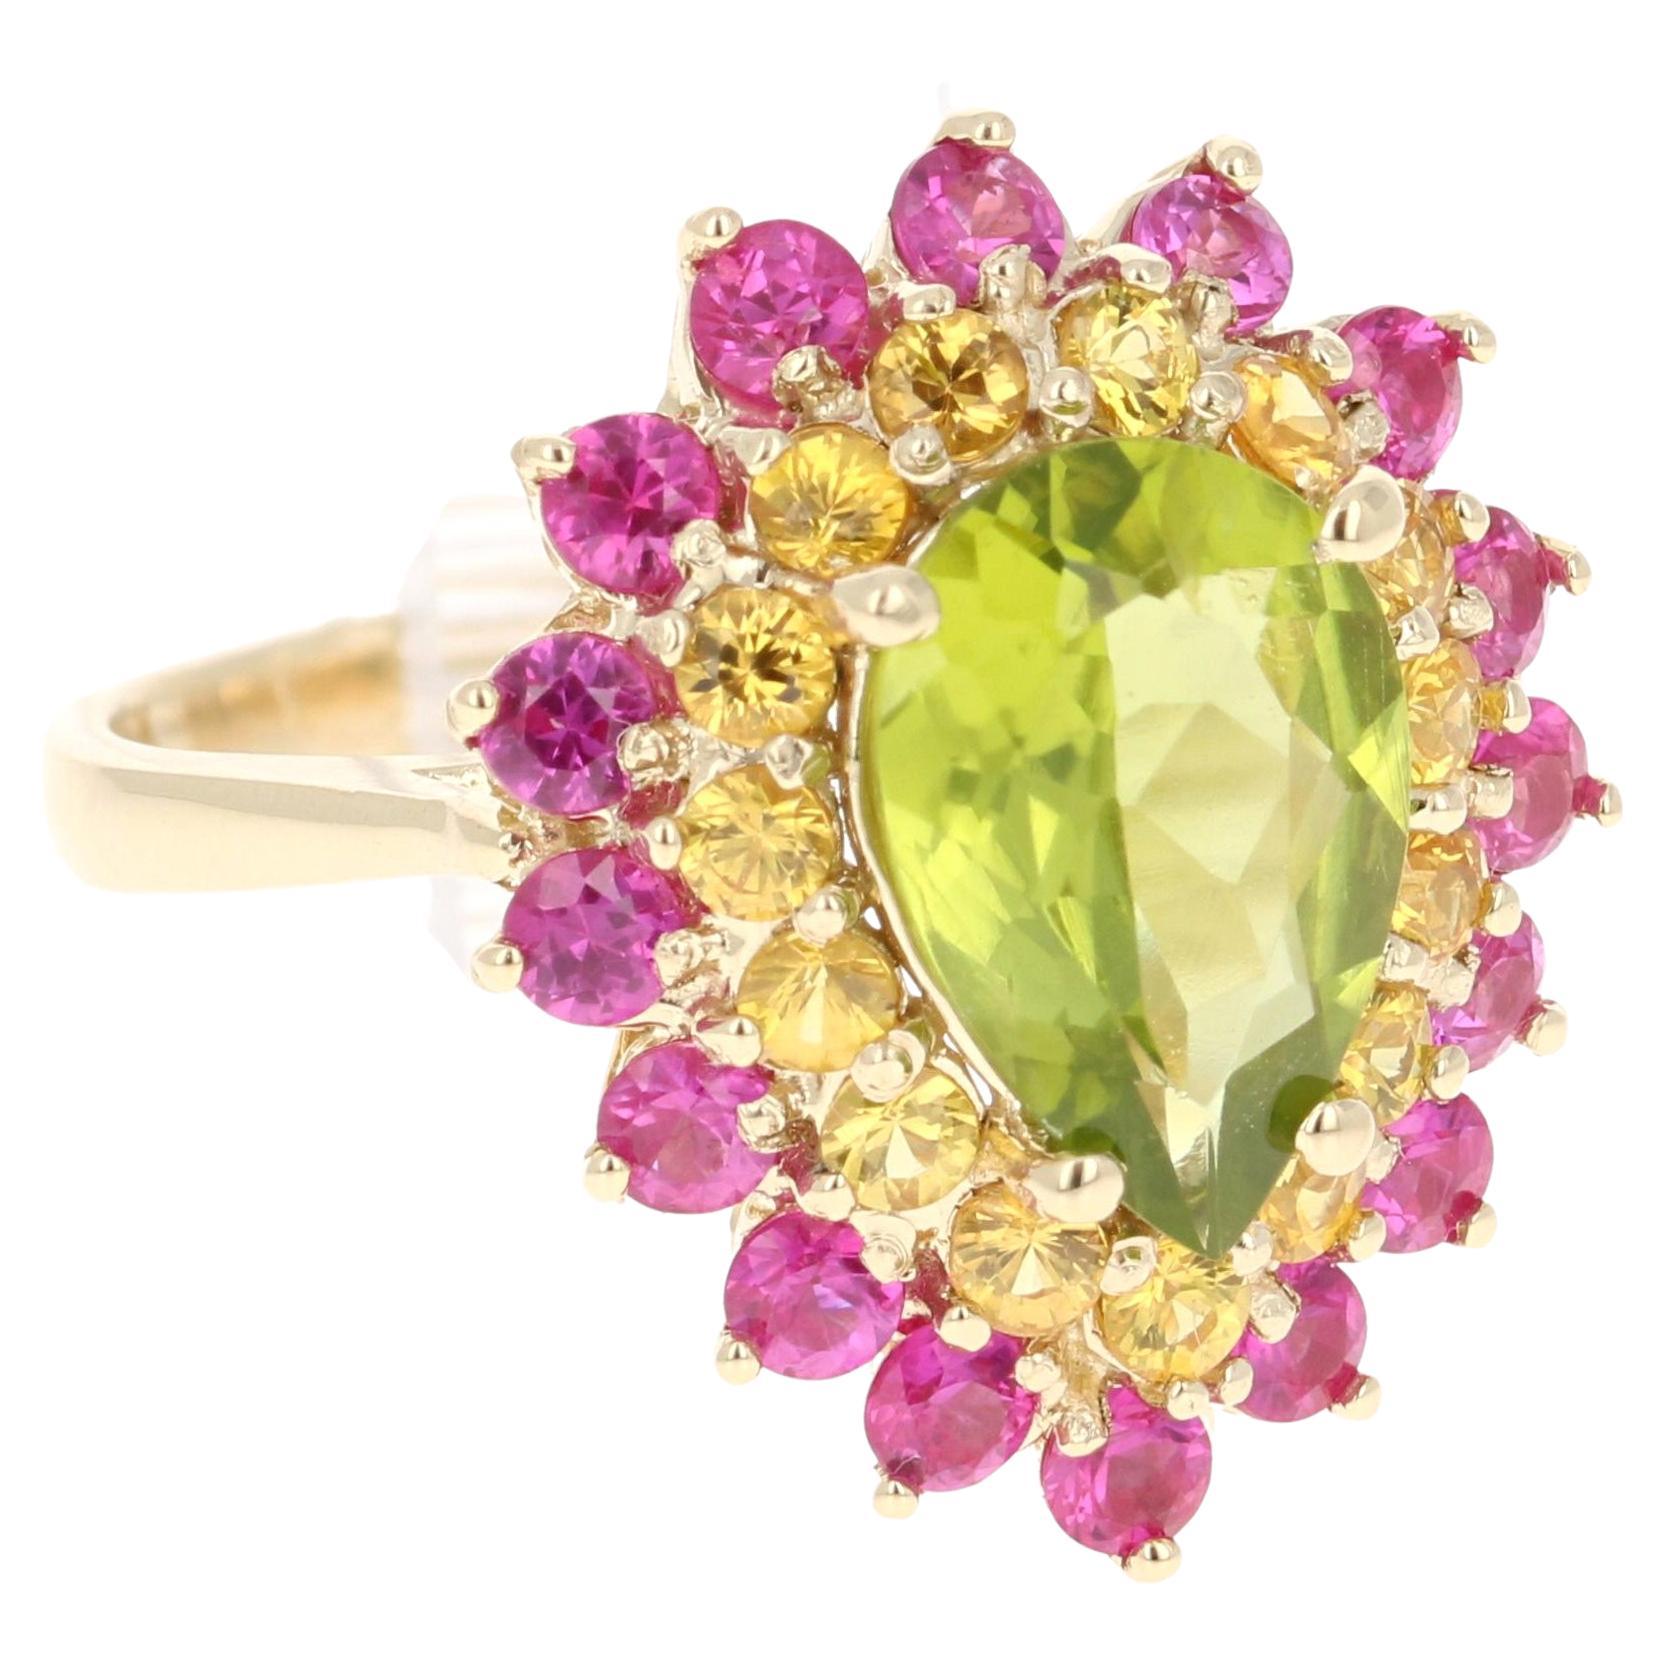 4.68 Carat Natural Peridot Sapphire Yellow Gold Cocktail Ring

This beautiful ring has a Pear Cut Peridot in the center that weighs 2.46 carats. The first halo is of 15 Yellow Sapphires that weigh 0.86 carats and the second halo is of Pink Sapphires